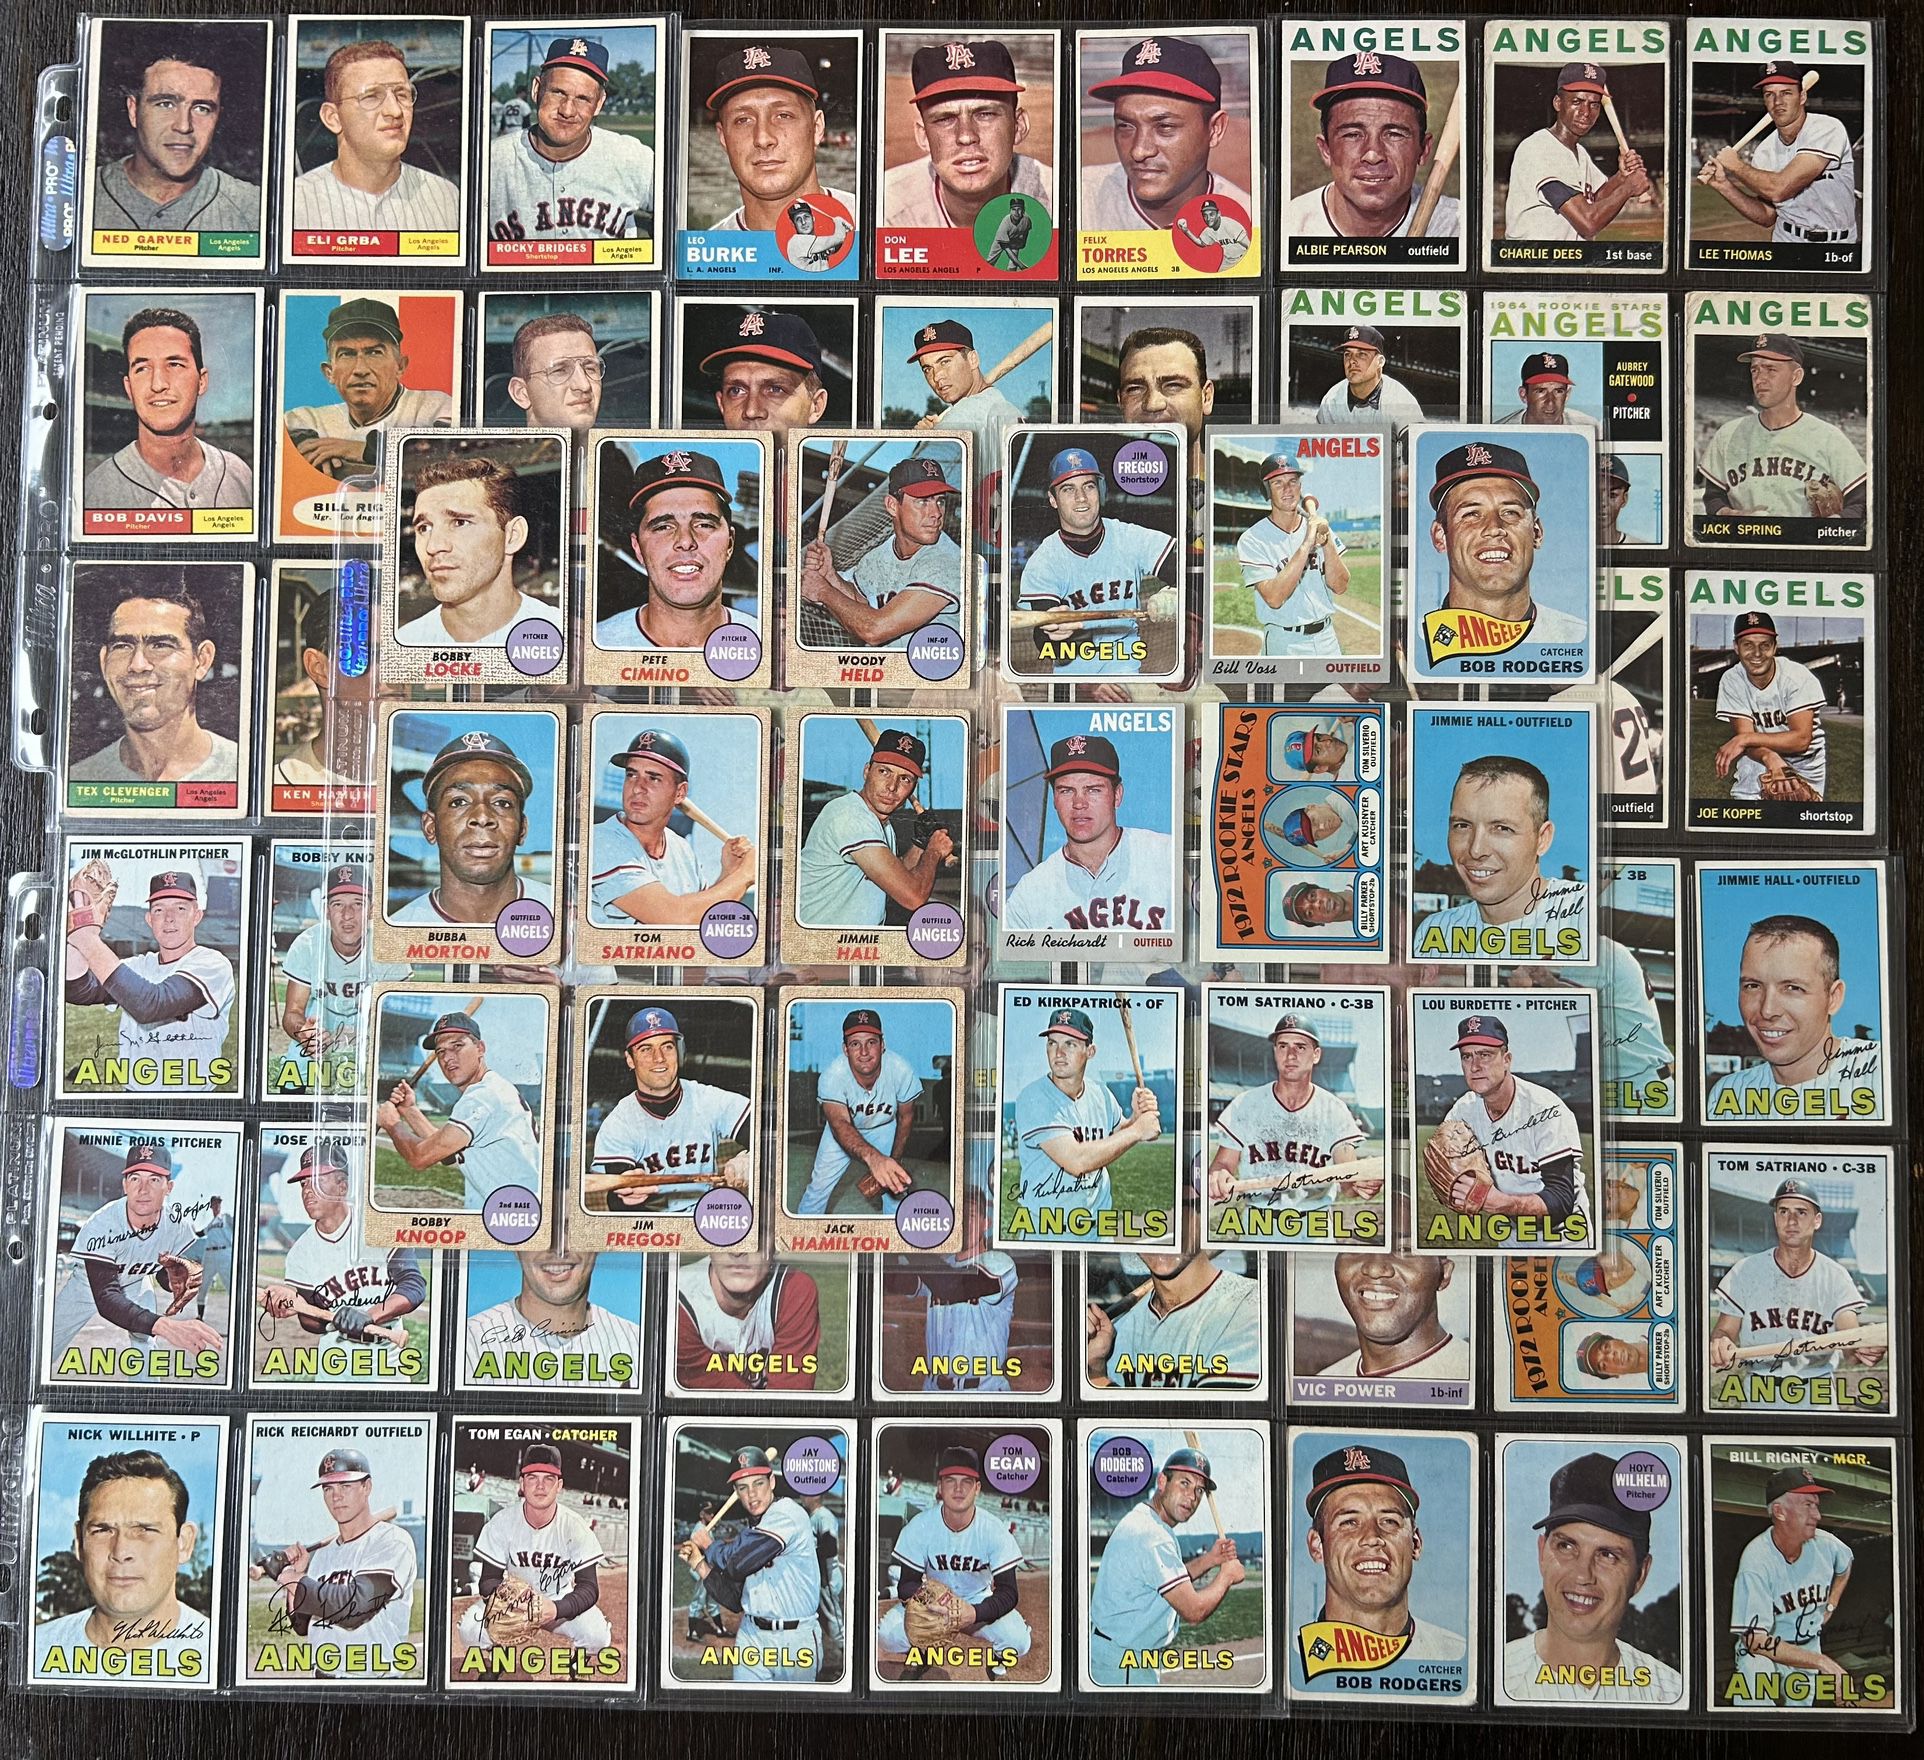 72 Anaheim Angels Vintage Baseball Cards 1961 Topps To 1972 Topps) Various Conditions 